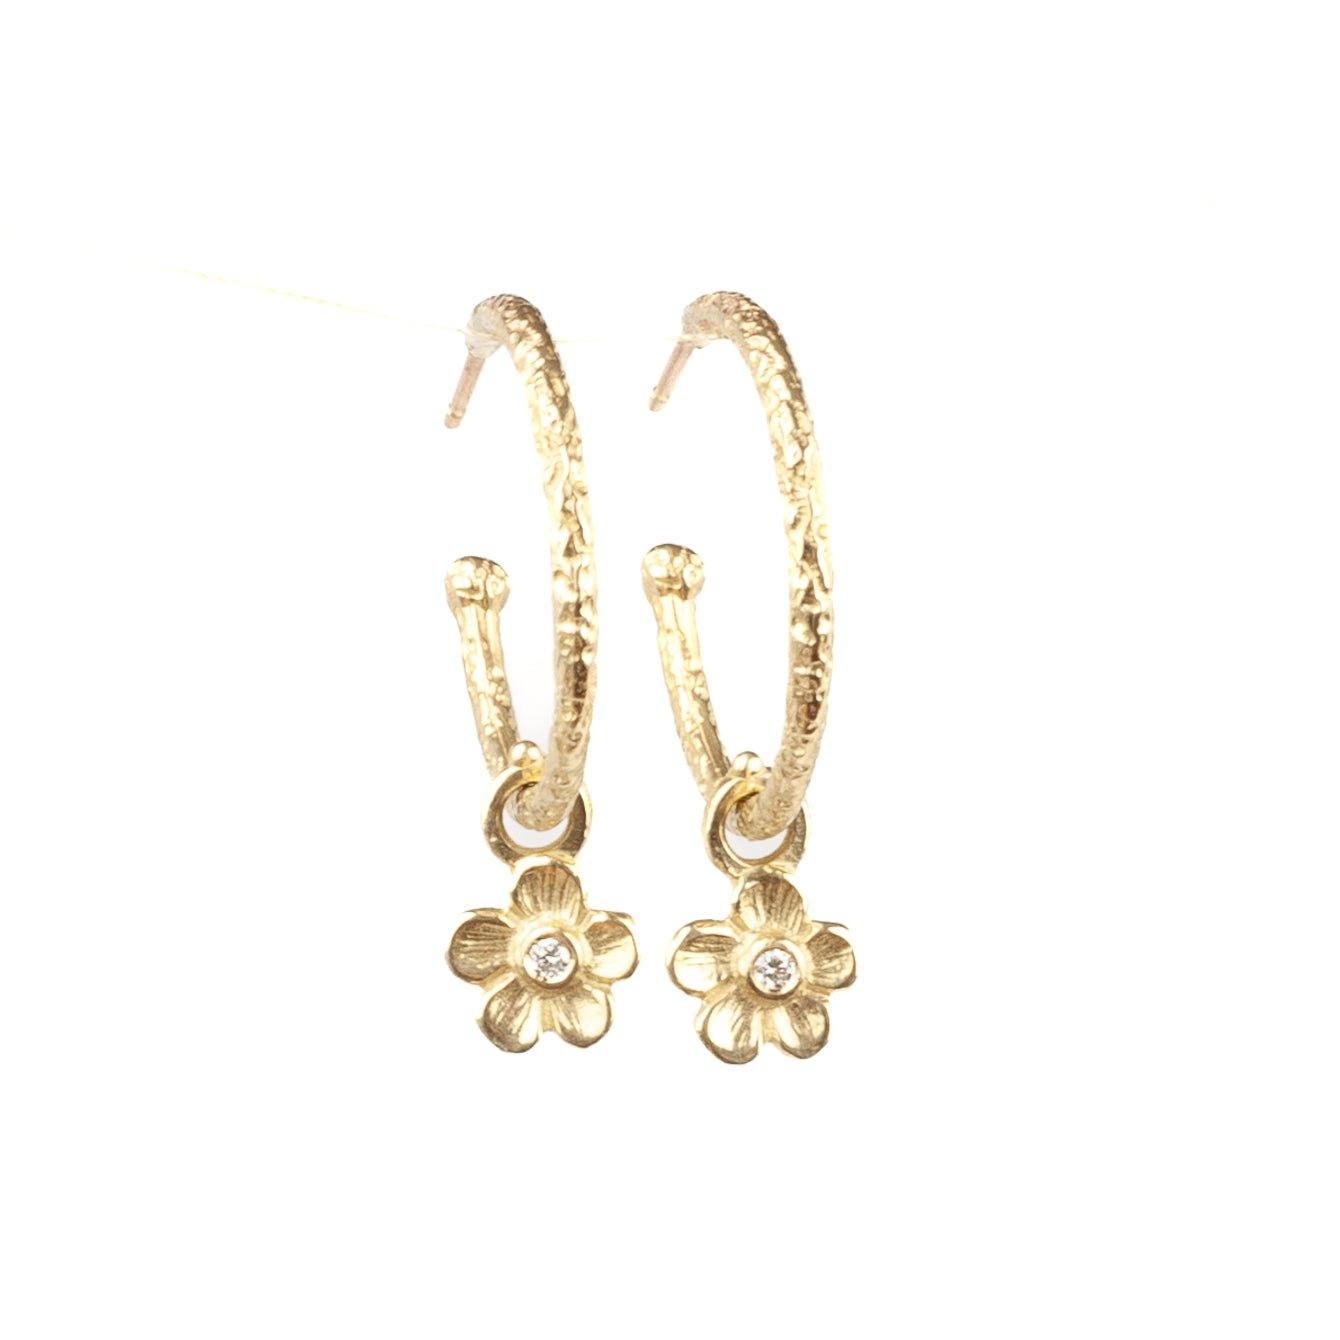 Gold Hoop Earrings With Charm